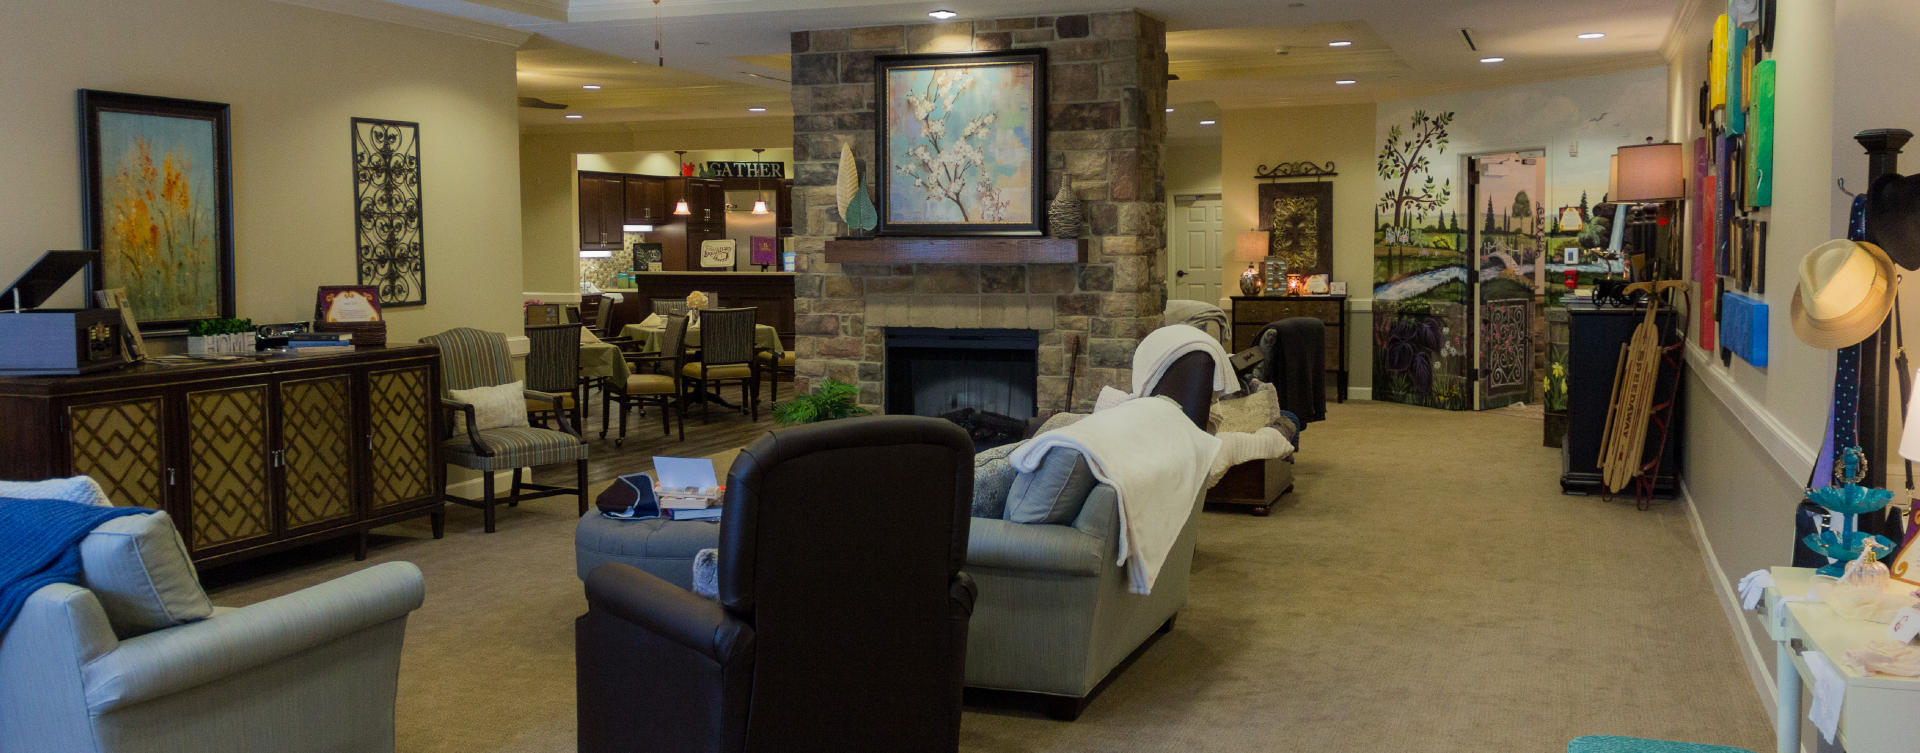 Residents can enjoy furniture covered in cozy fabrics in the Mary B’s living room at Bickford of Suffolk